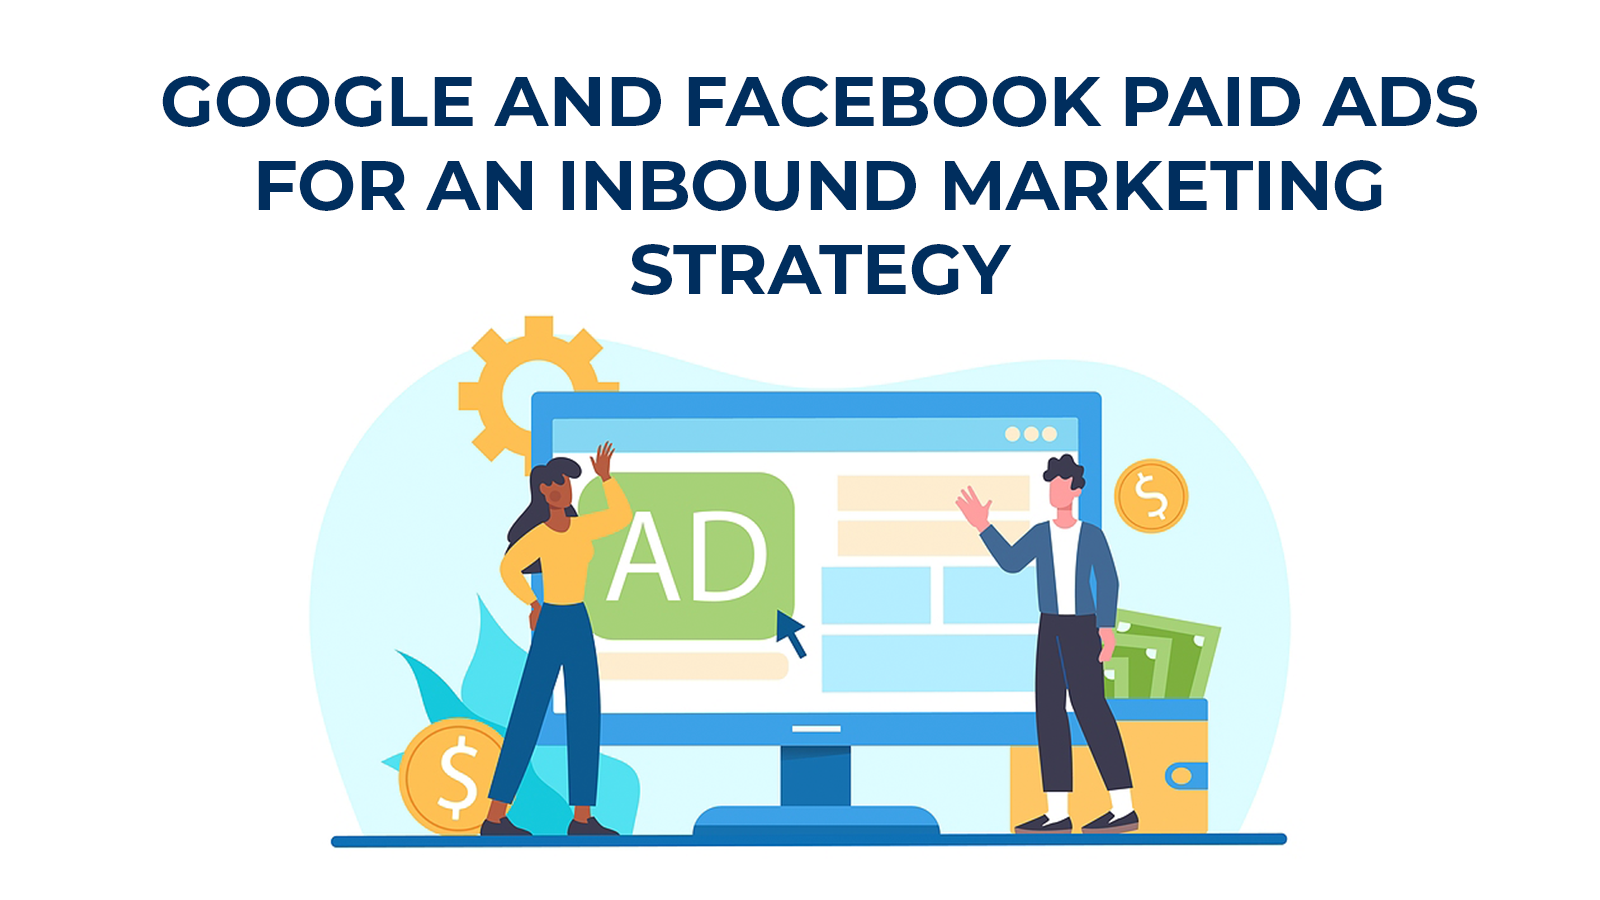 Google and Facebook Paid Ads for an Inbound Marketing Strategy